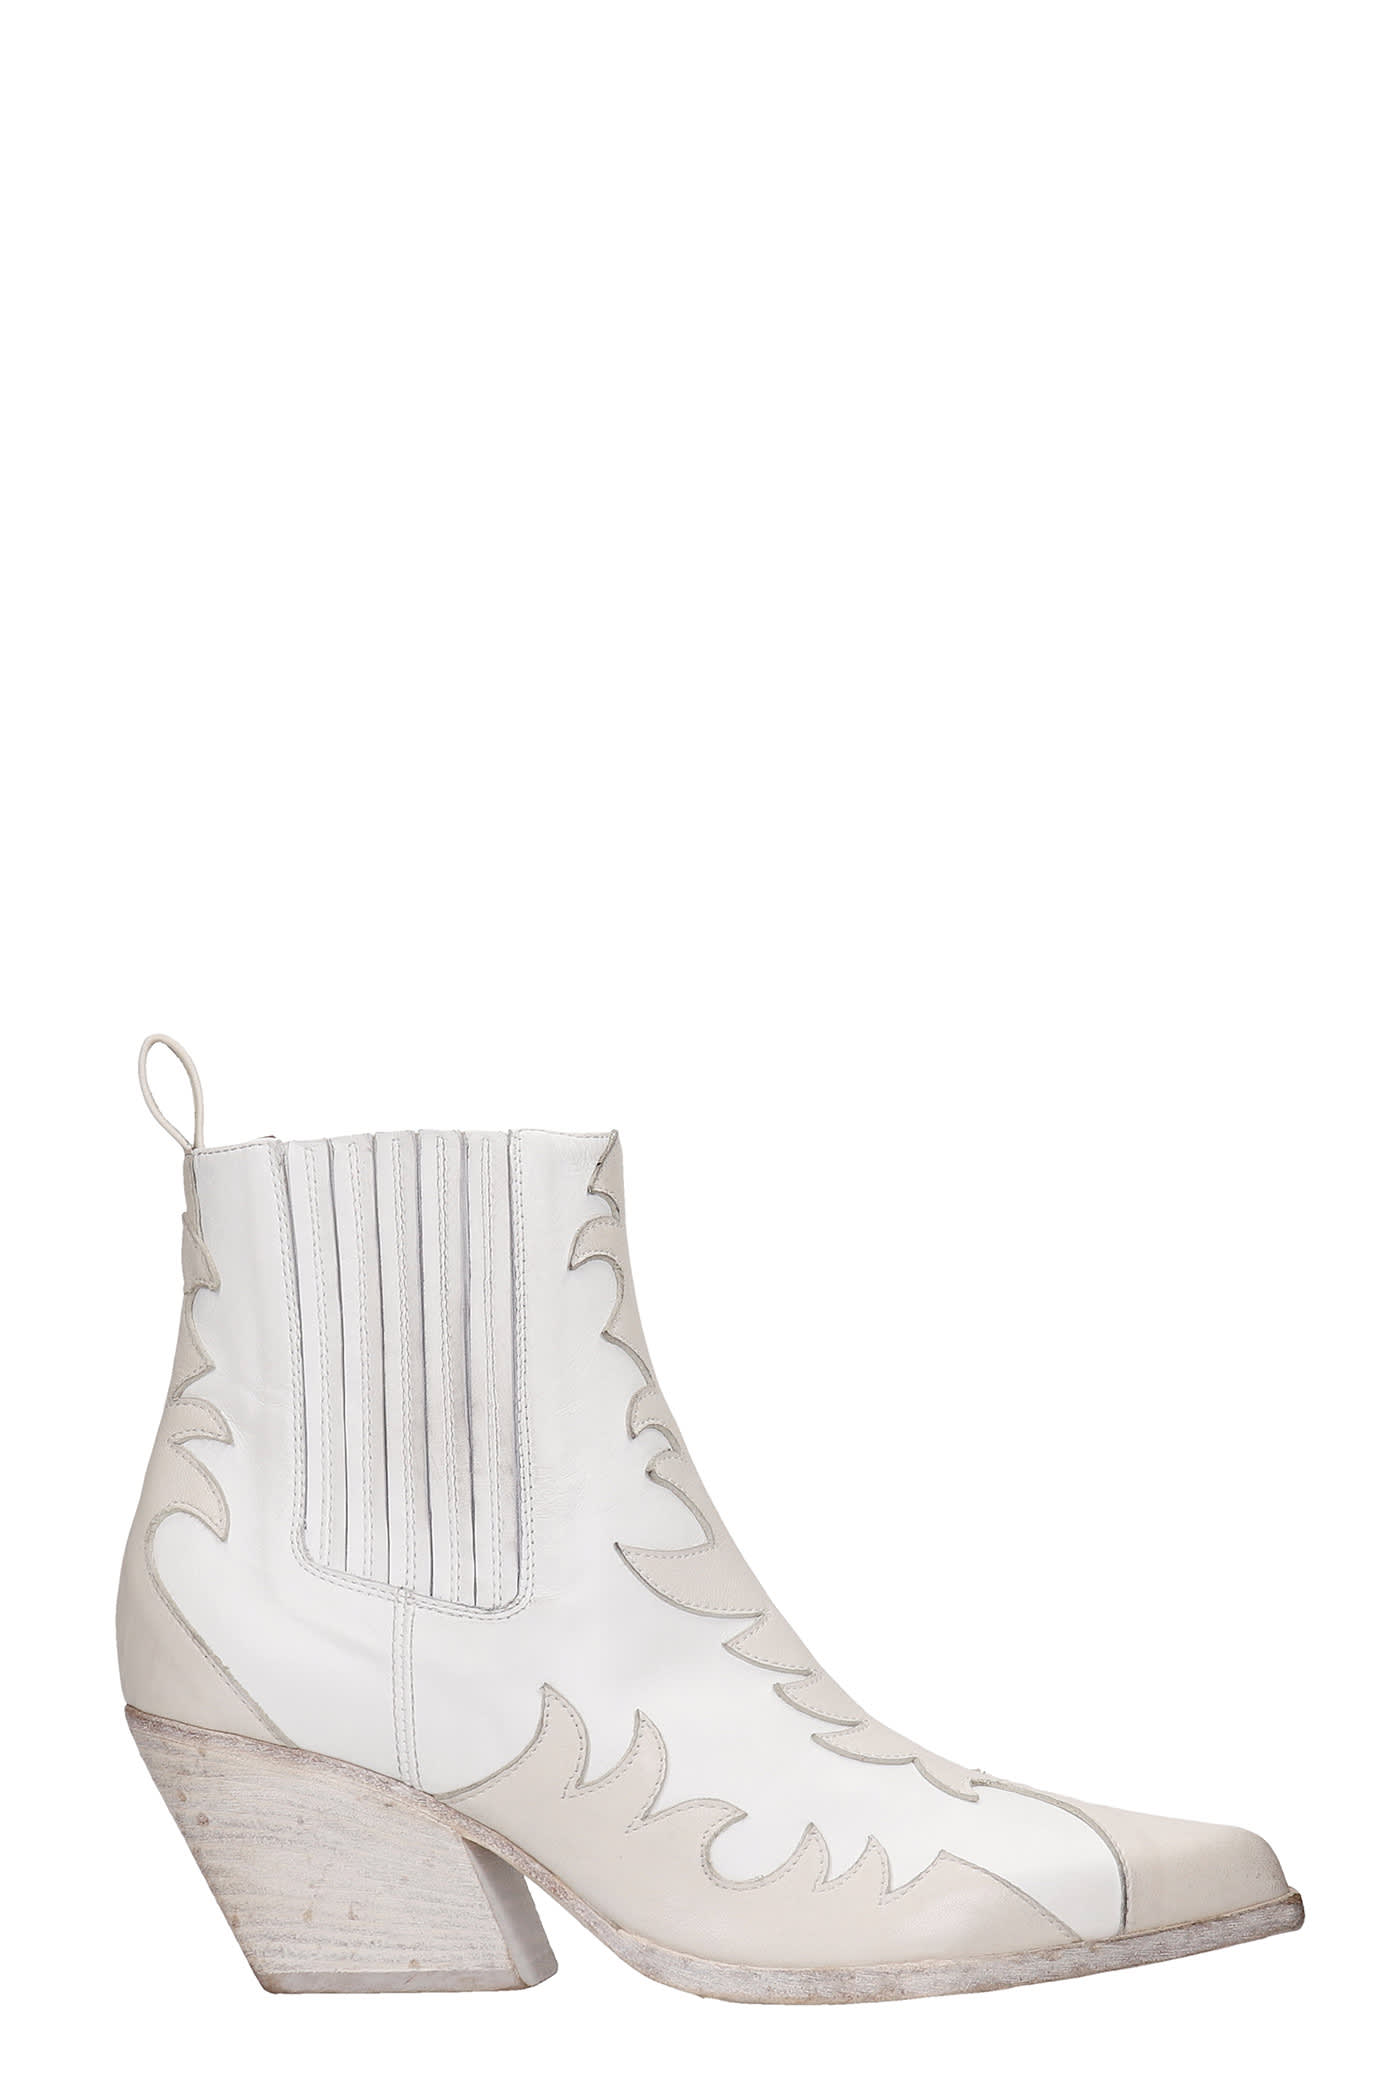 Elena Iachi Texan Ankle Boots In White Leather